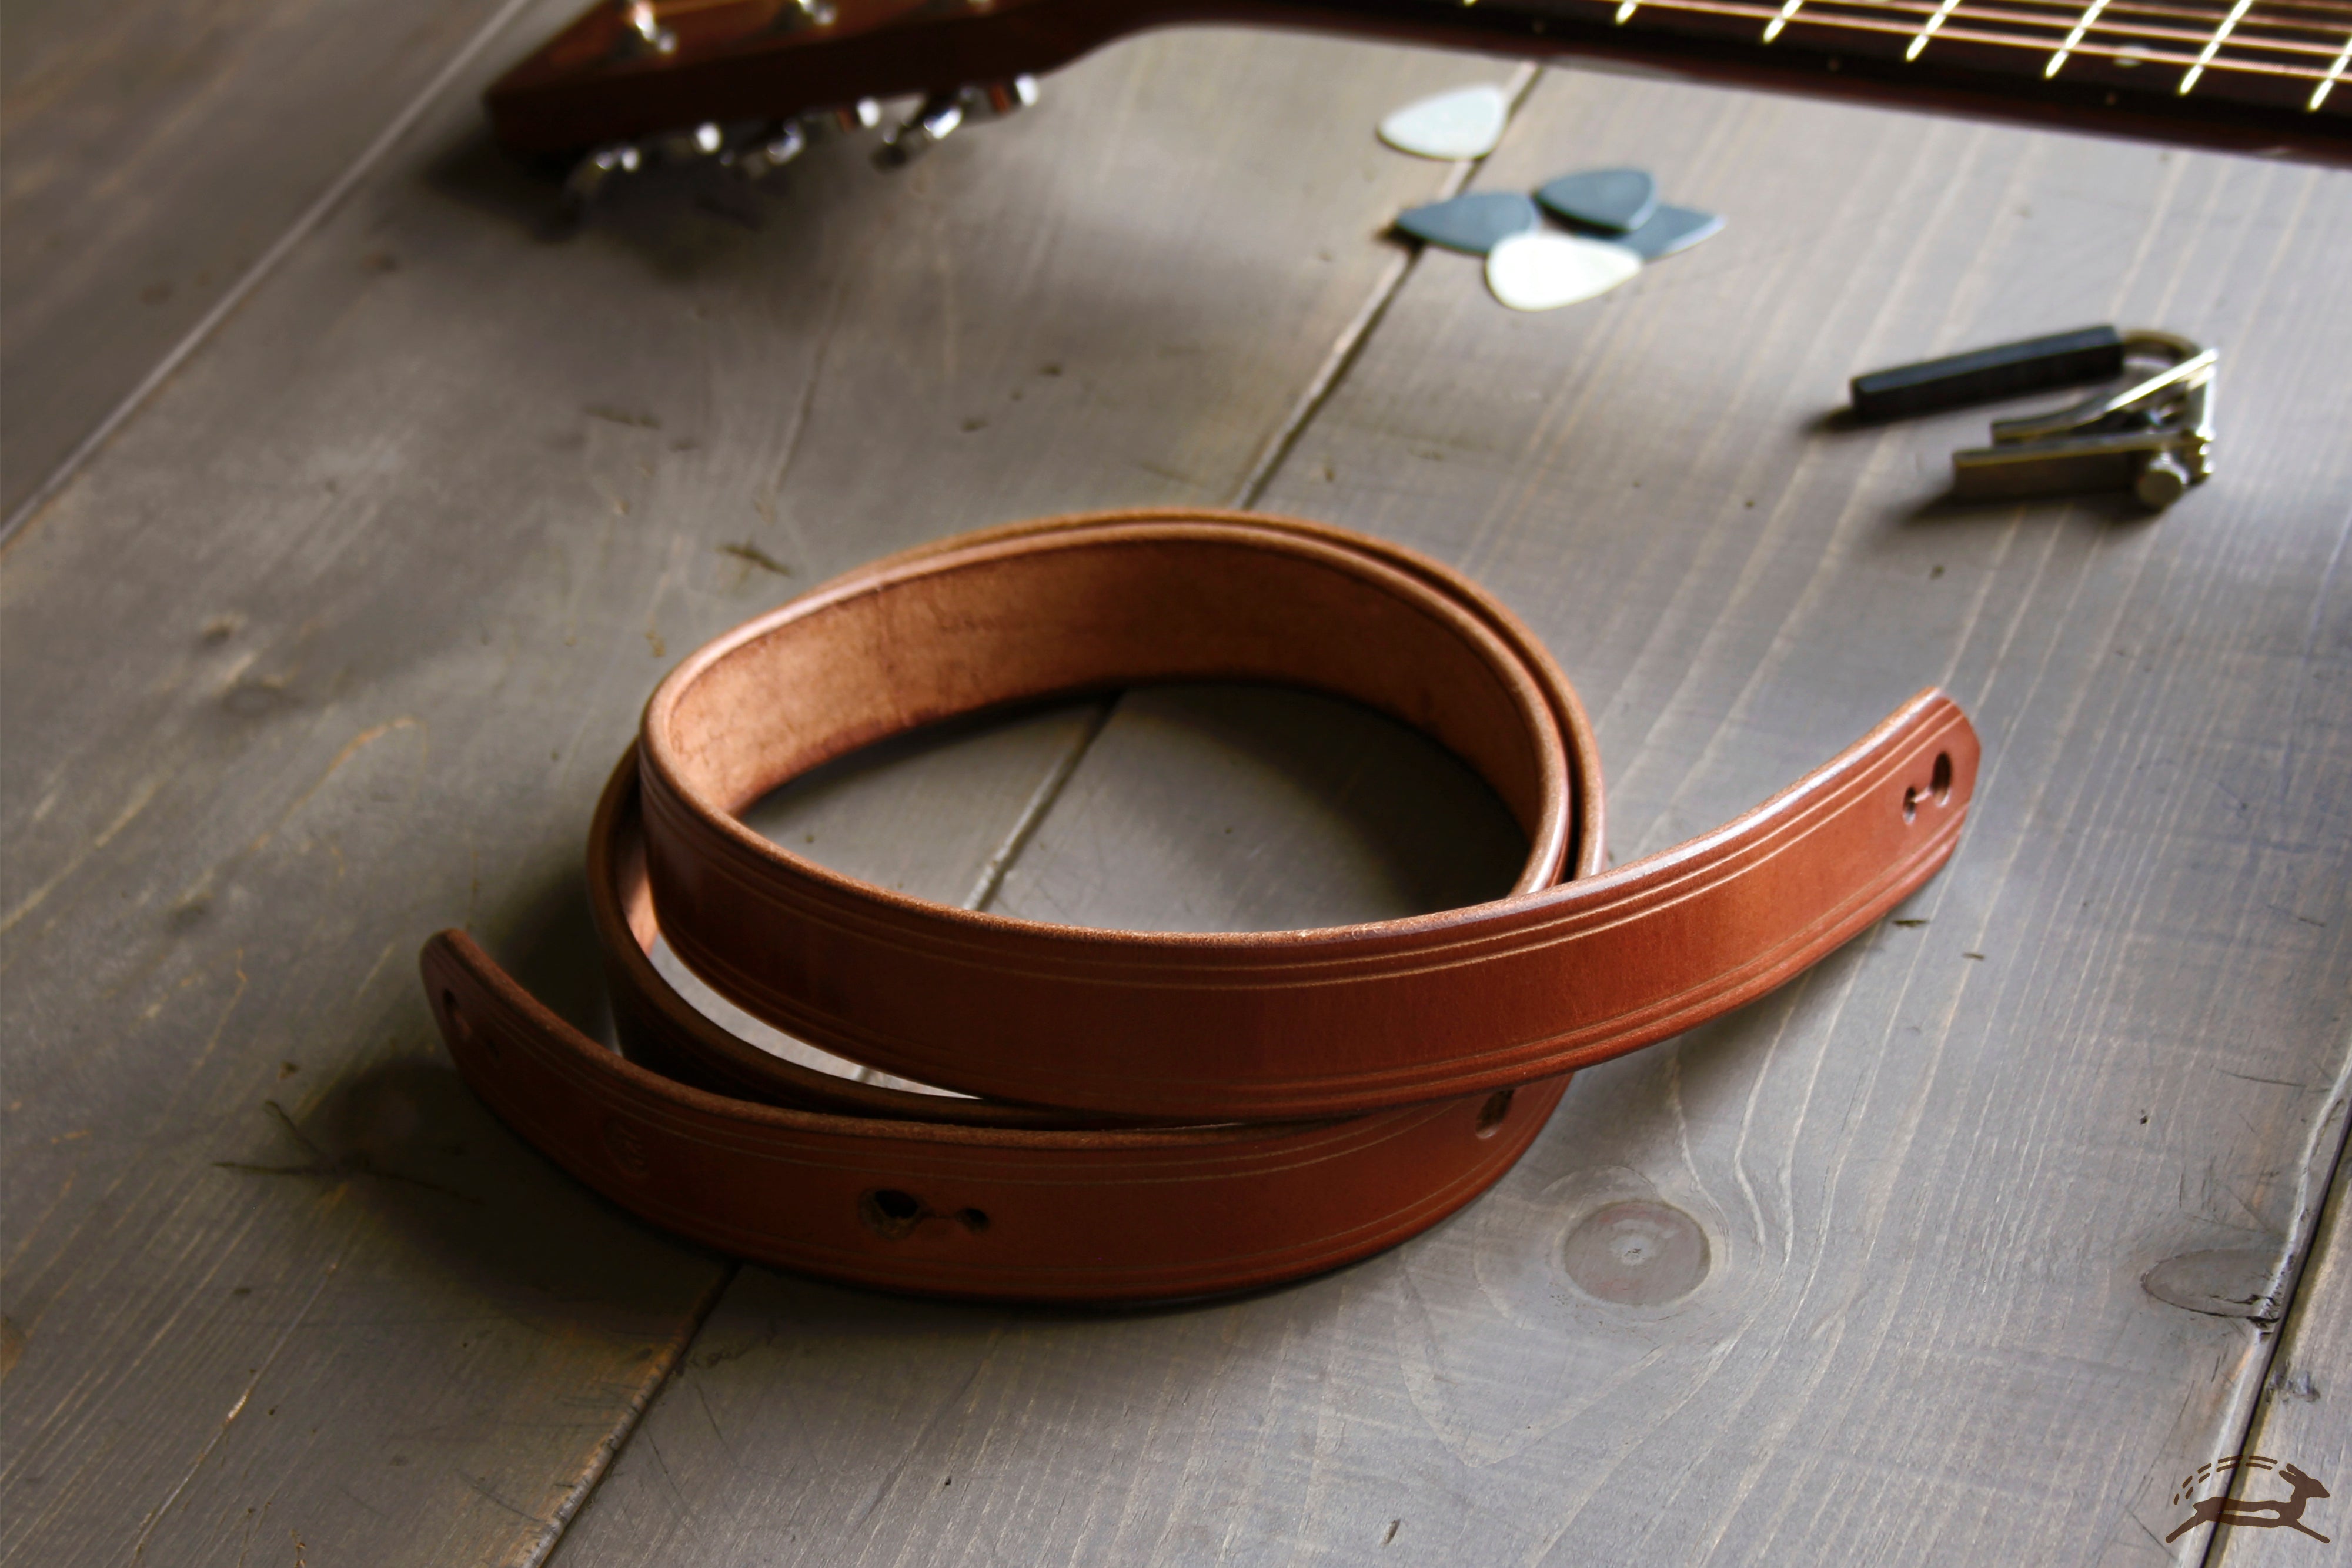 Buckle Front Skinny Leather Guitar Strap